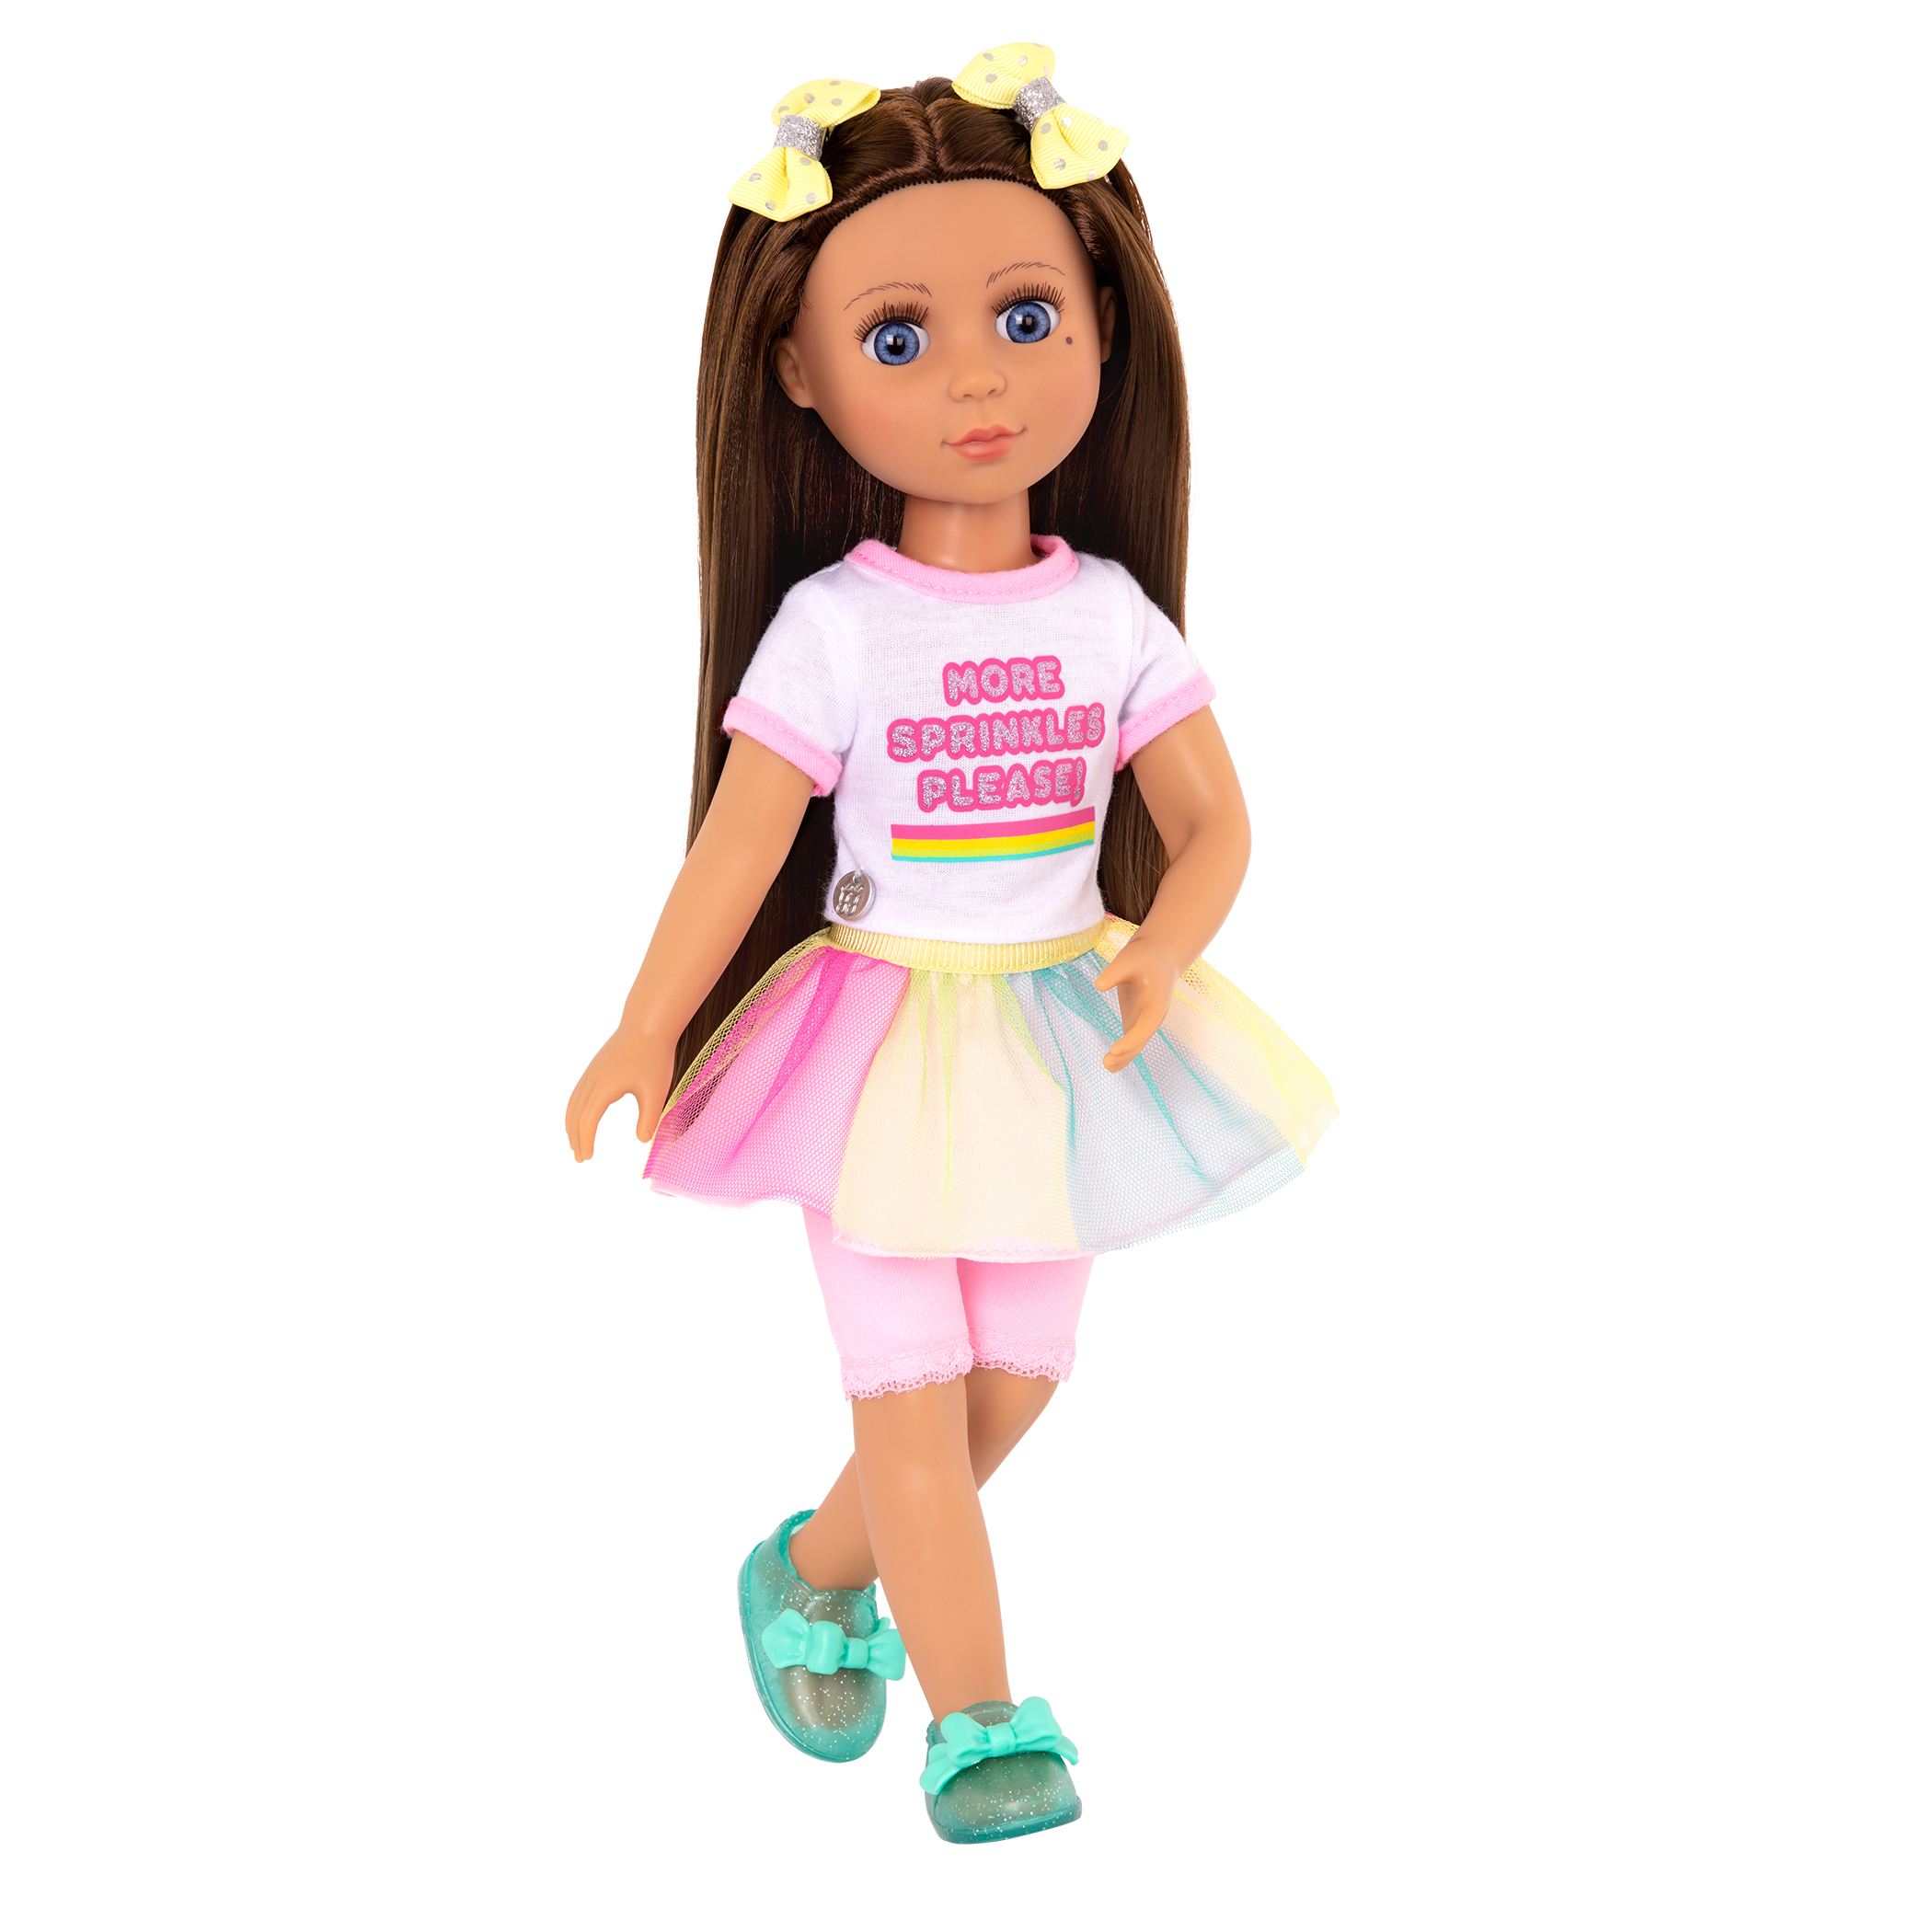 Glitter Girls - Candice 14-inch Poseable Fashion Doll - Dolls for Girls Age  3 & Up